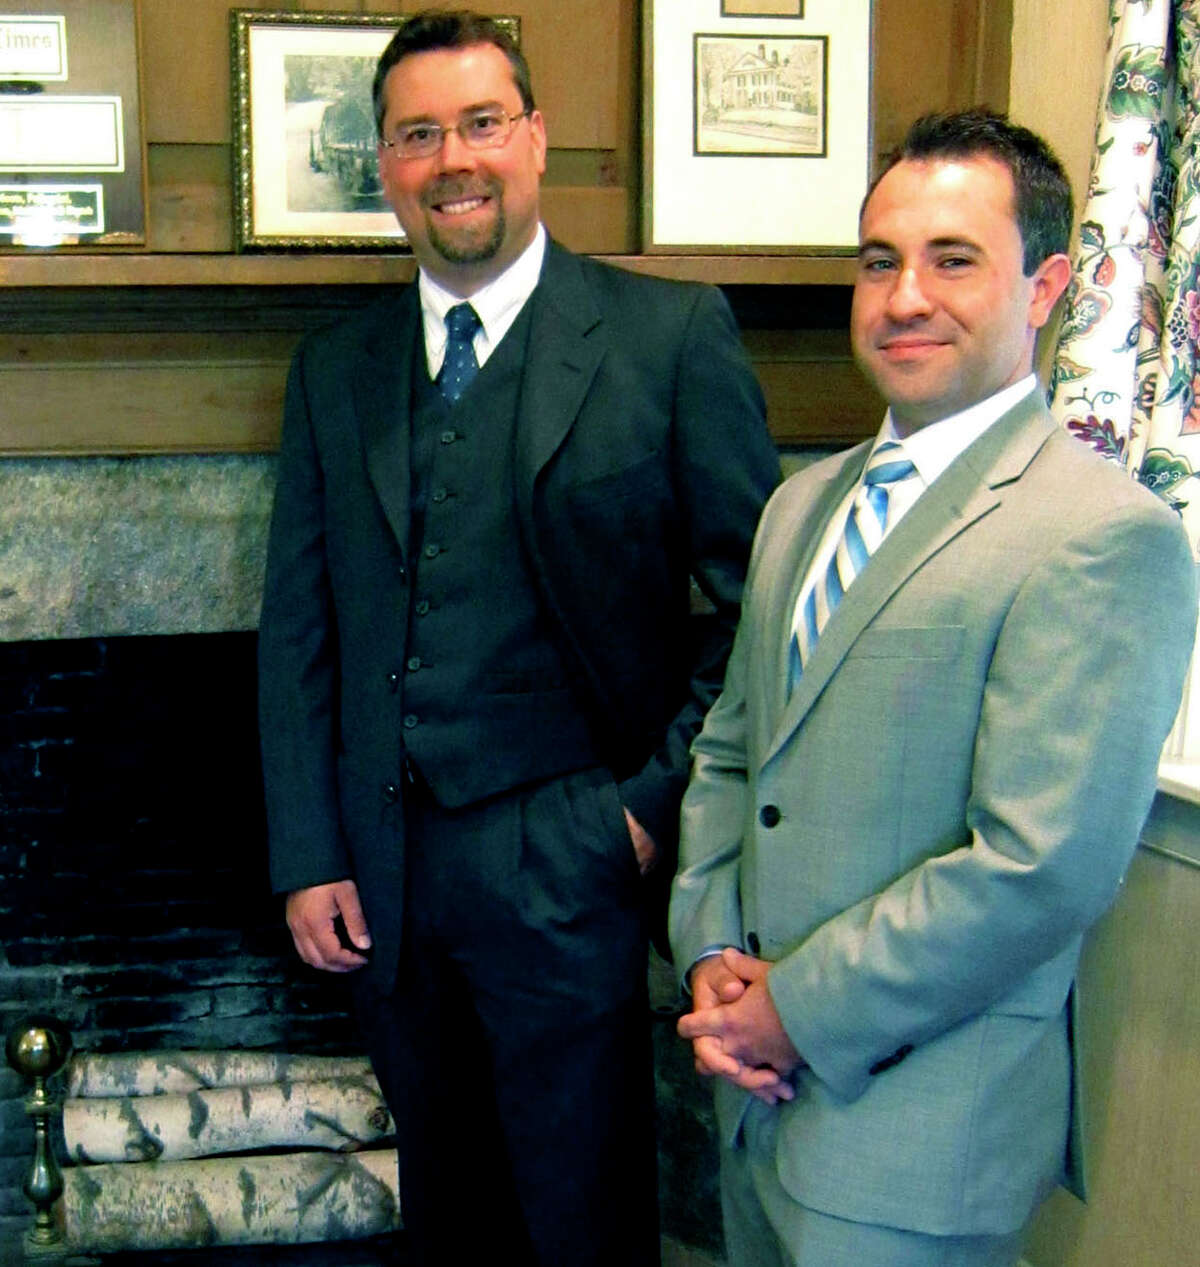 David Gronbach, left, and David Albanese are associate attorneys at the Moots Pellegrini Law Firm in New Milford. May 2012